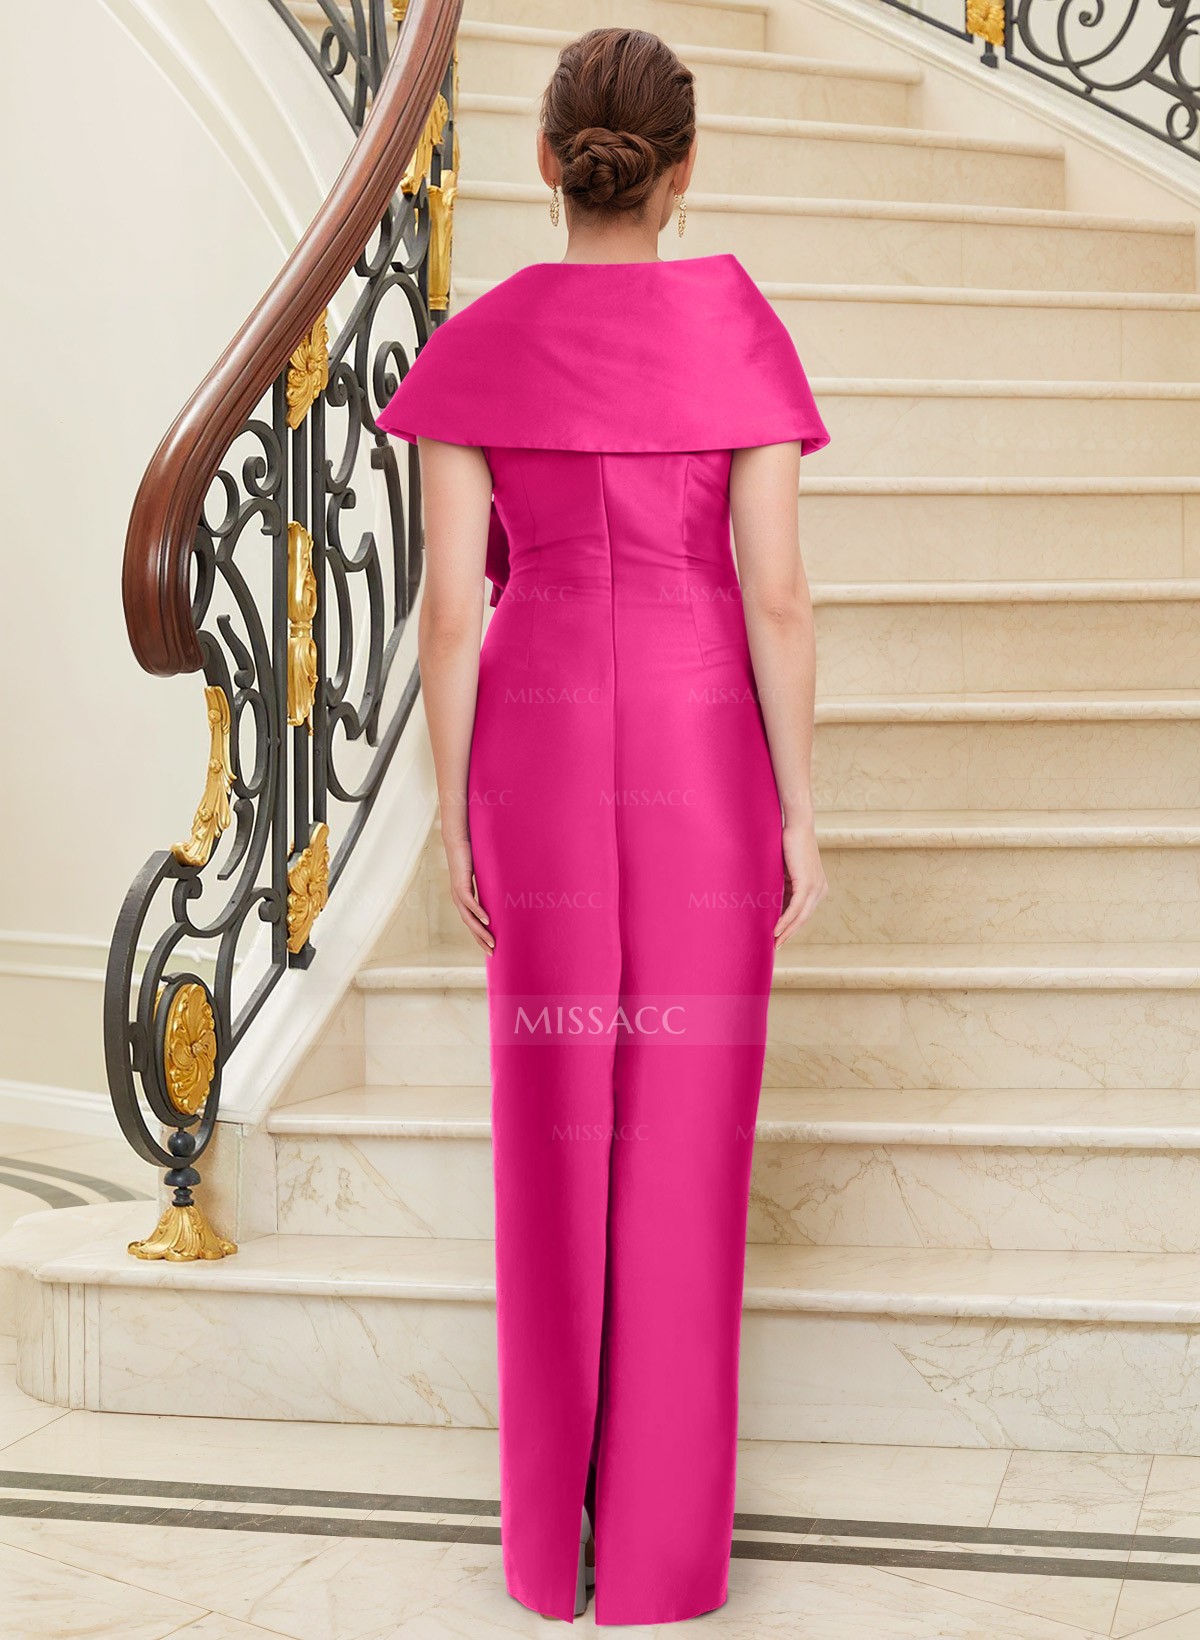 Sheath/Column Asymmetrical Satin Mother Of The Bride Dresses With Bow(s)